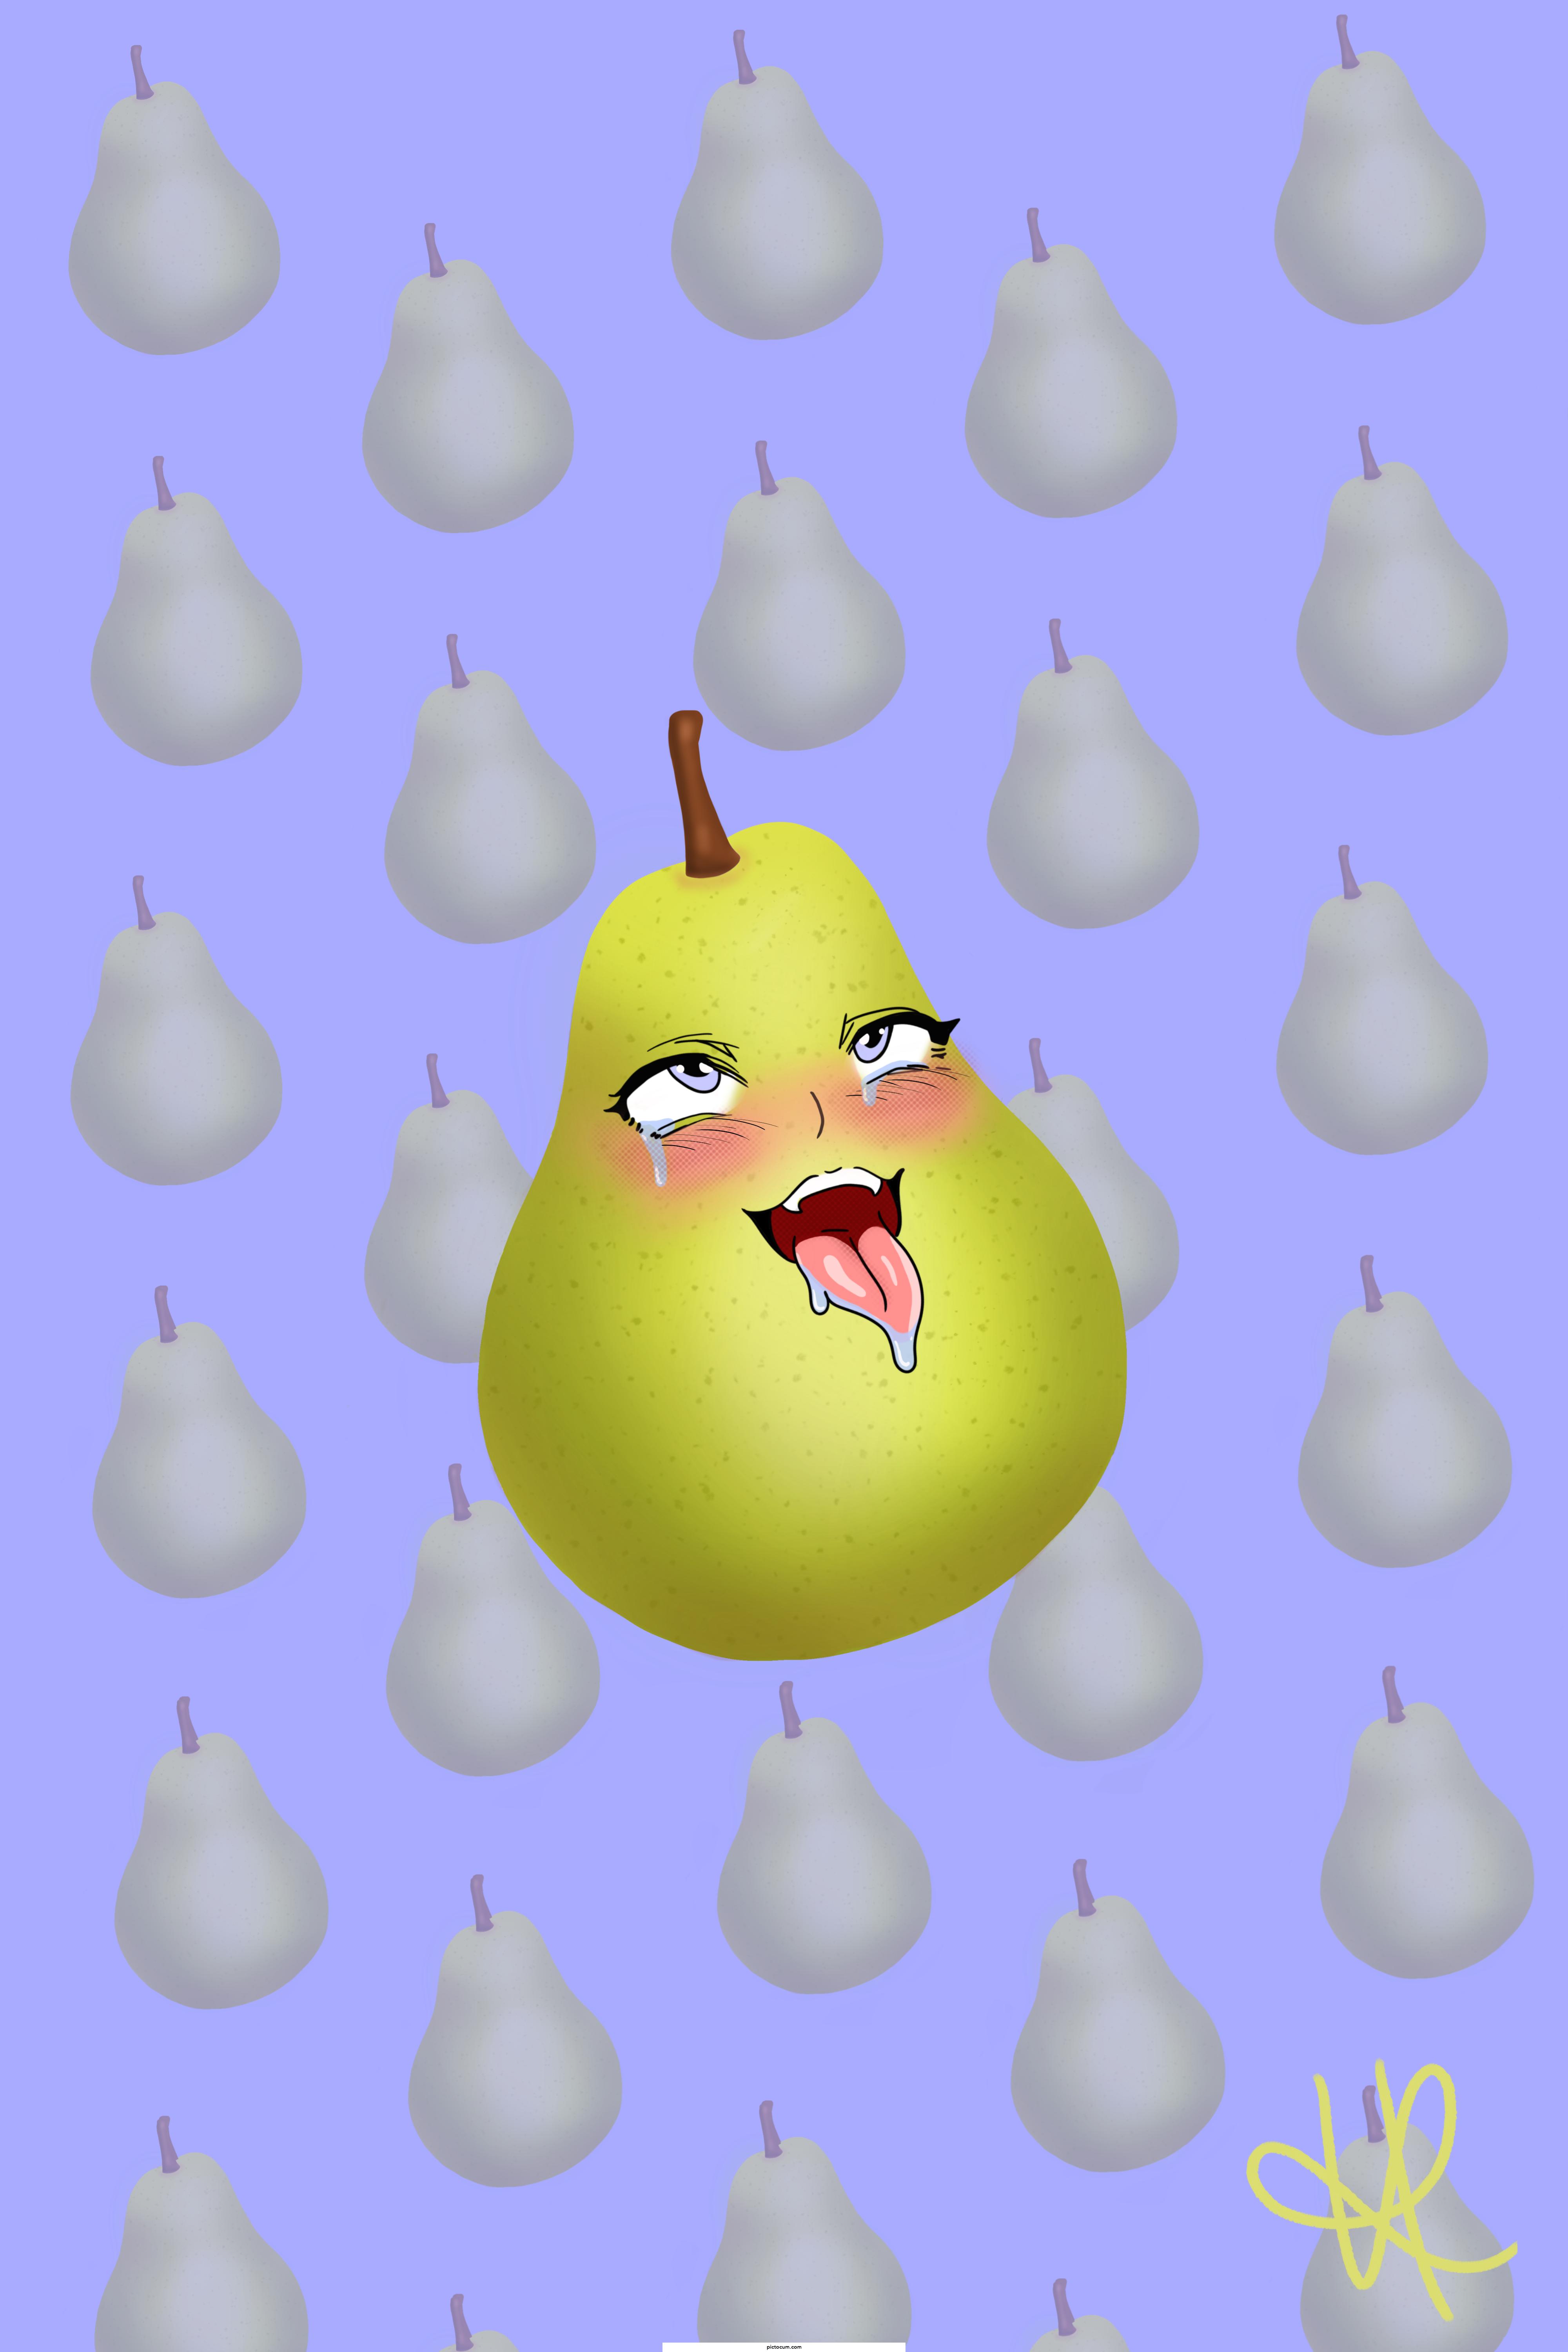 ahegao 🍐 Next in line for our favorite smut fruit salad